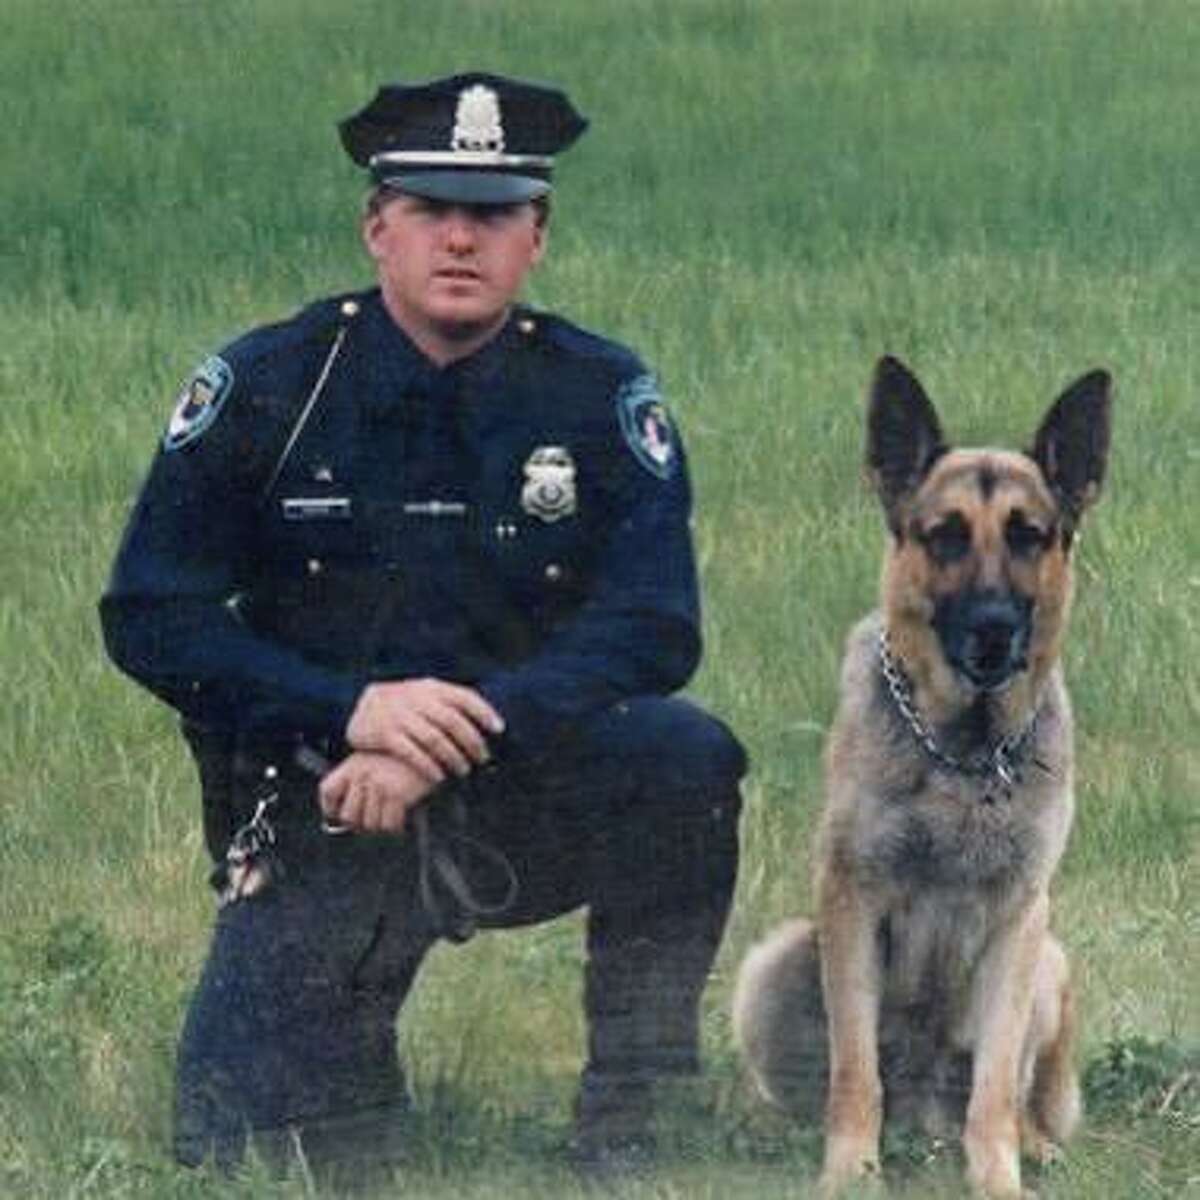 Officer Daniel Scott Wasson with his police dog partner General. The two served the Milford, Conn., community together prior to Wasson’s line-of-duty death on April 12, 1987.